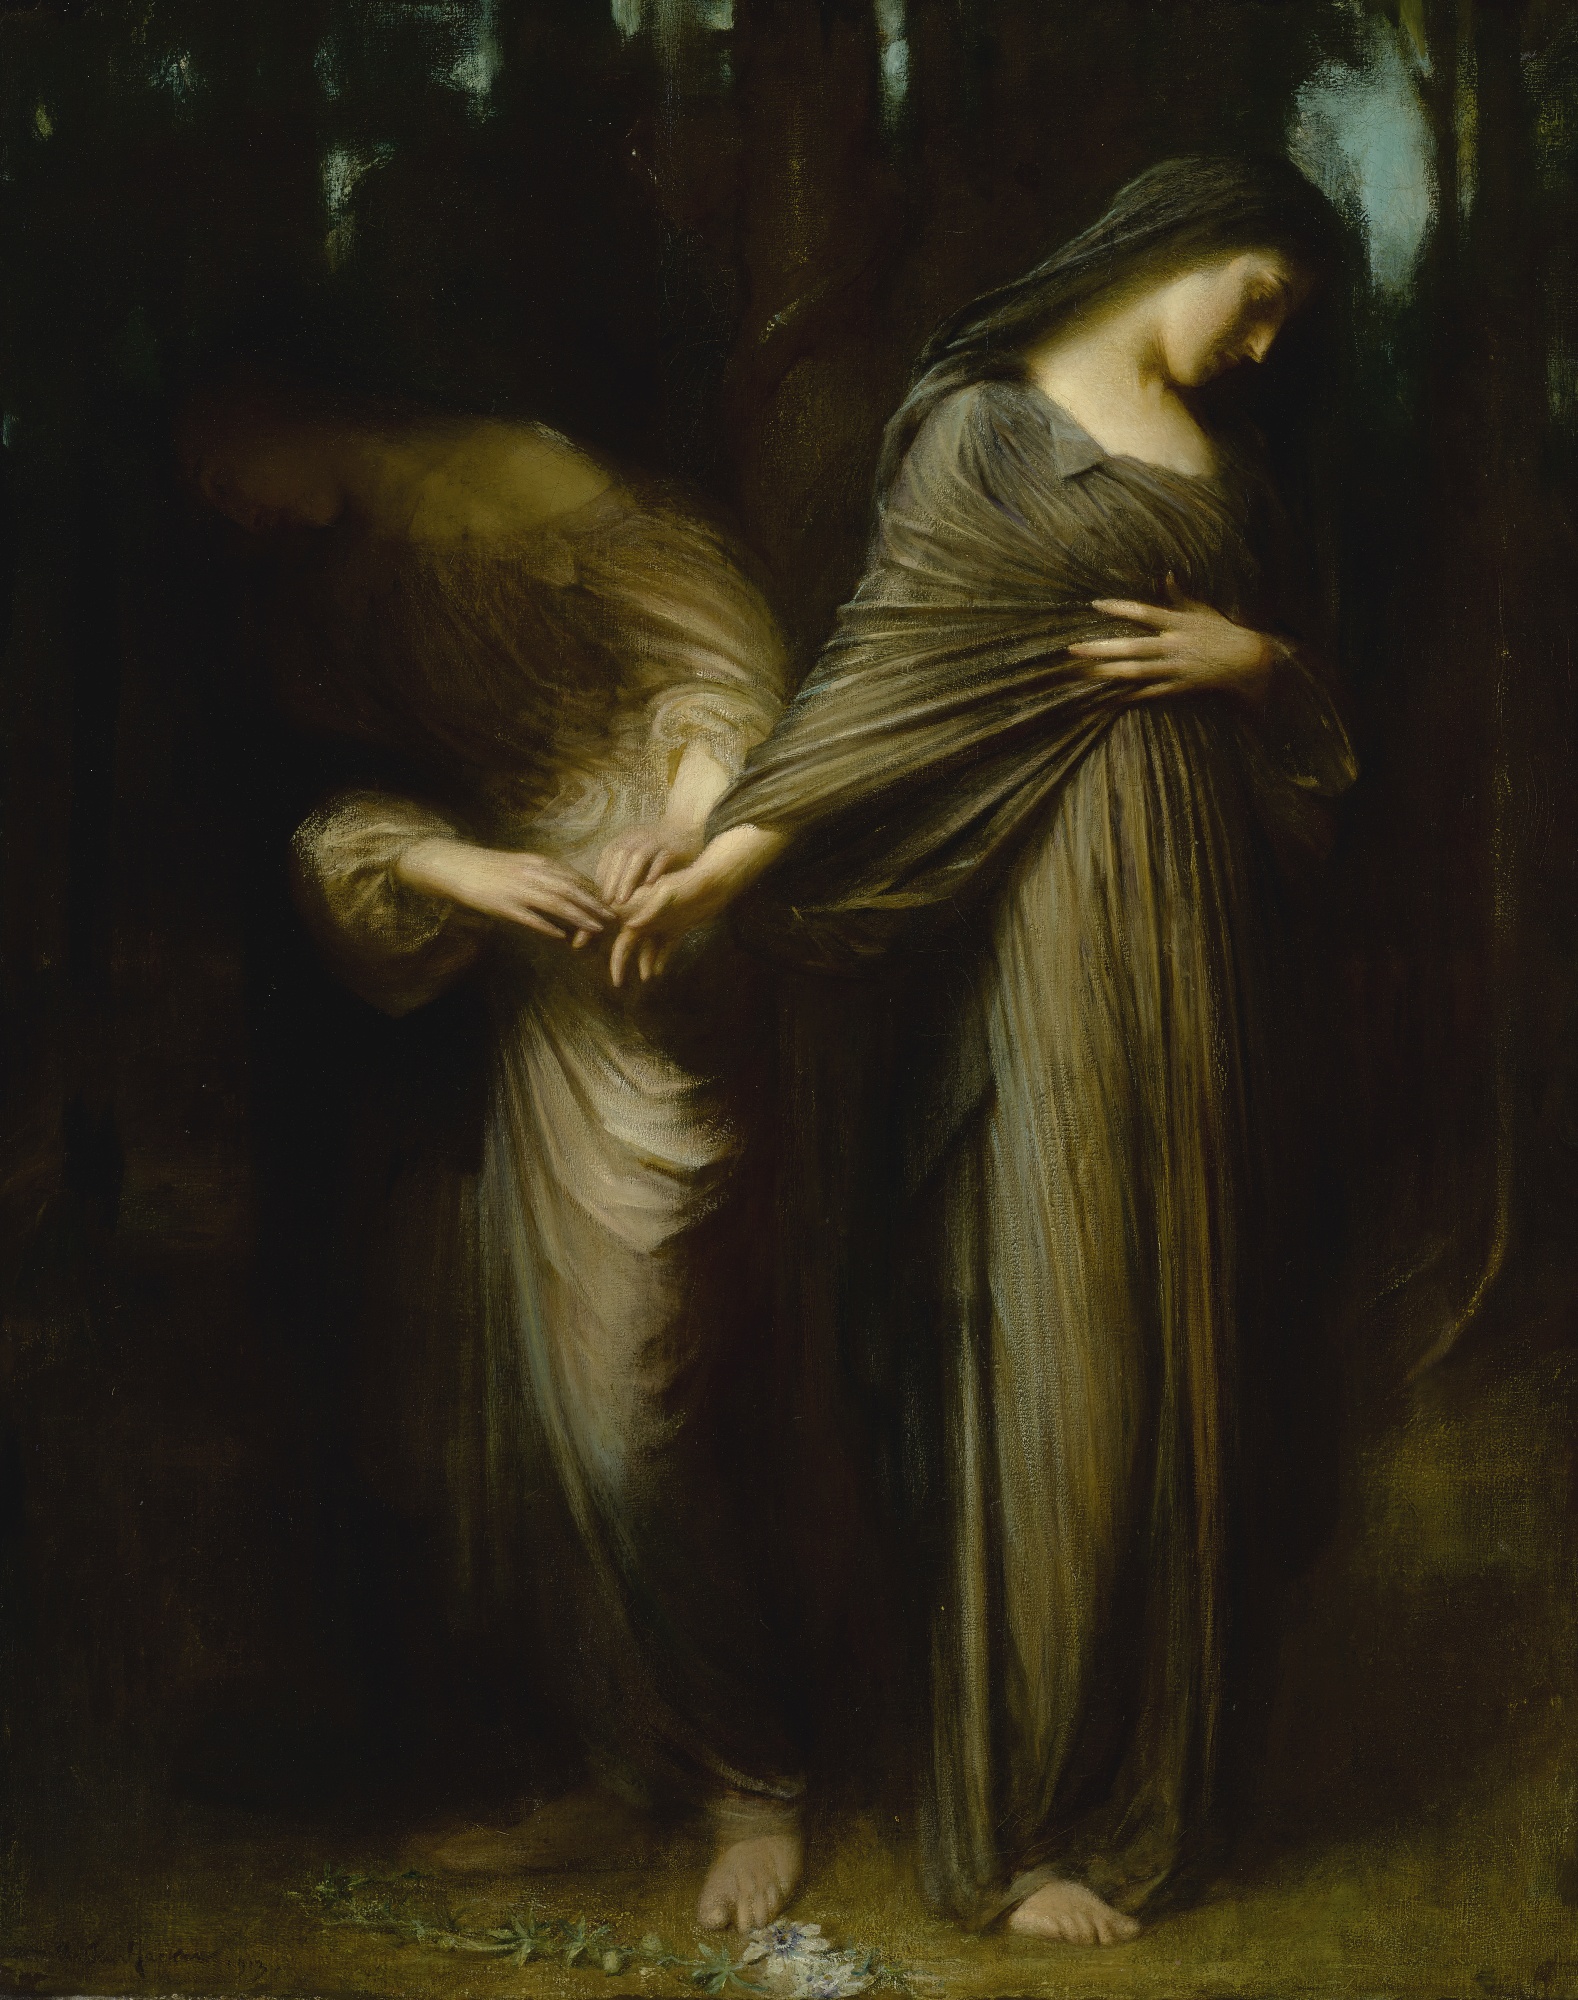 Vale (Farewell) by Arthur Hacker - 1913 - 153 x 122.2 cm private collection